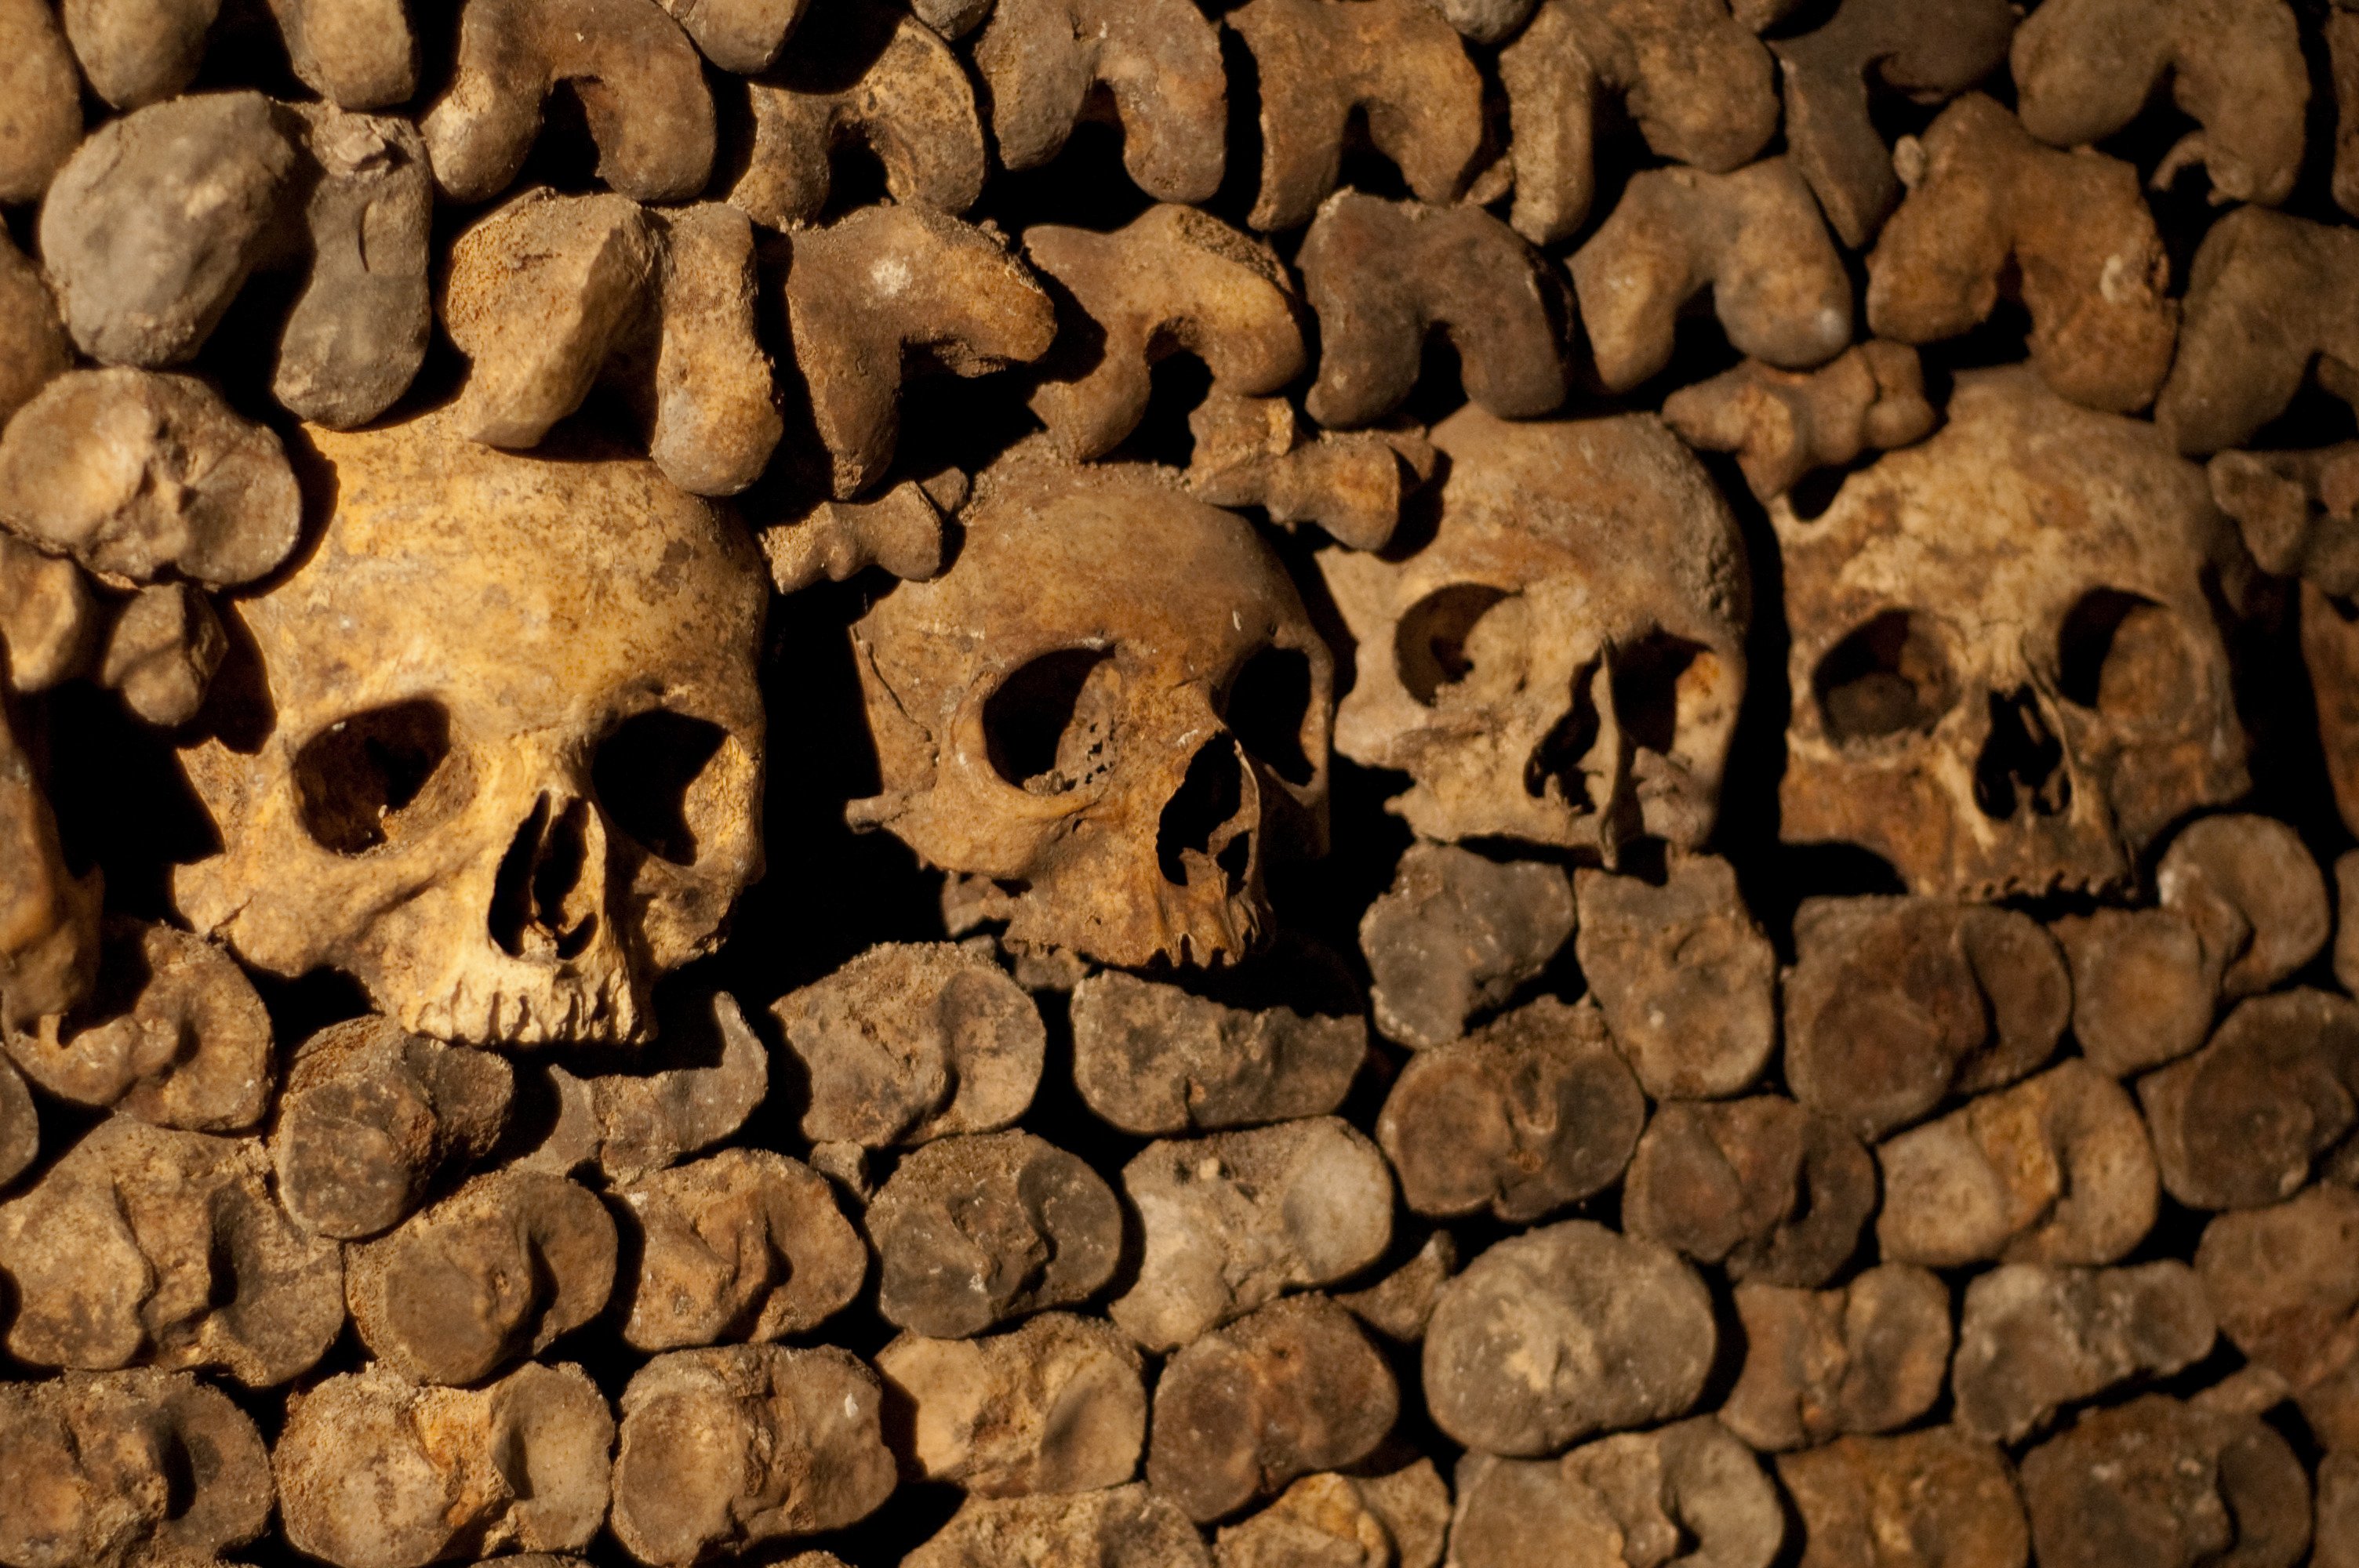 The Paris Catacombs, containing the remains of millions of Parisians, are among the world’s most popular underground attractions. Photo: Shutterstock